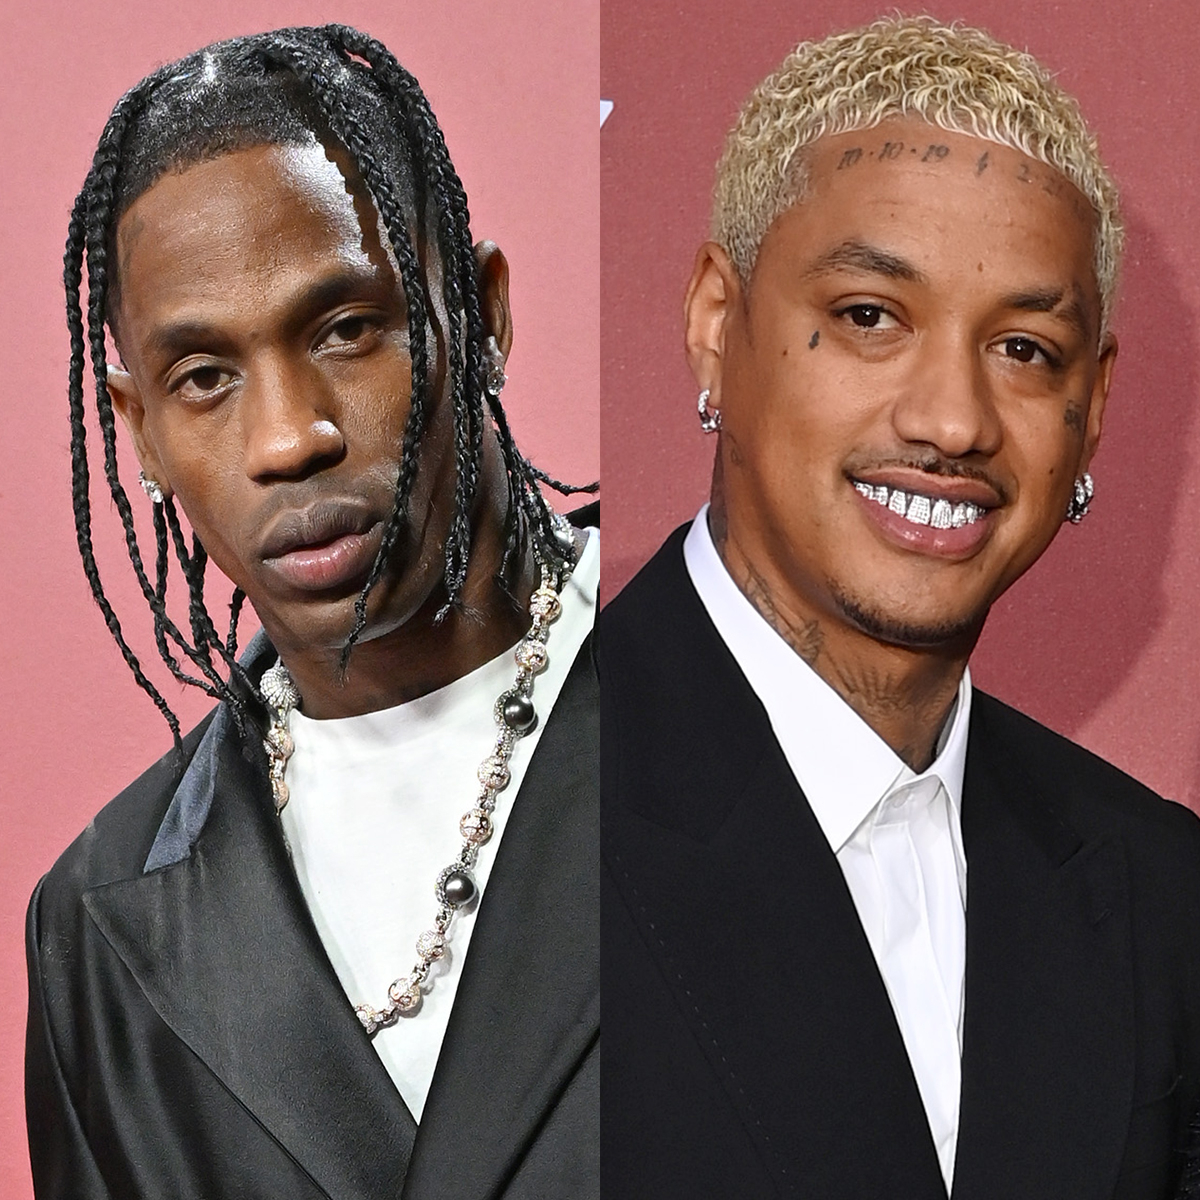 The Truth About Travis Scott & Alexander “A.E.” Edwards’ Cannes Fight